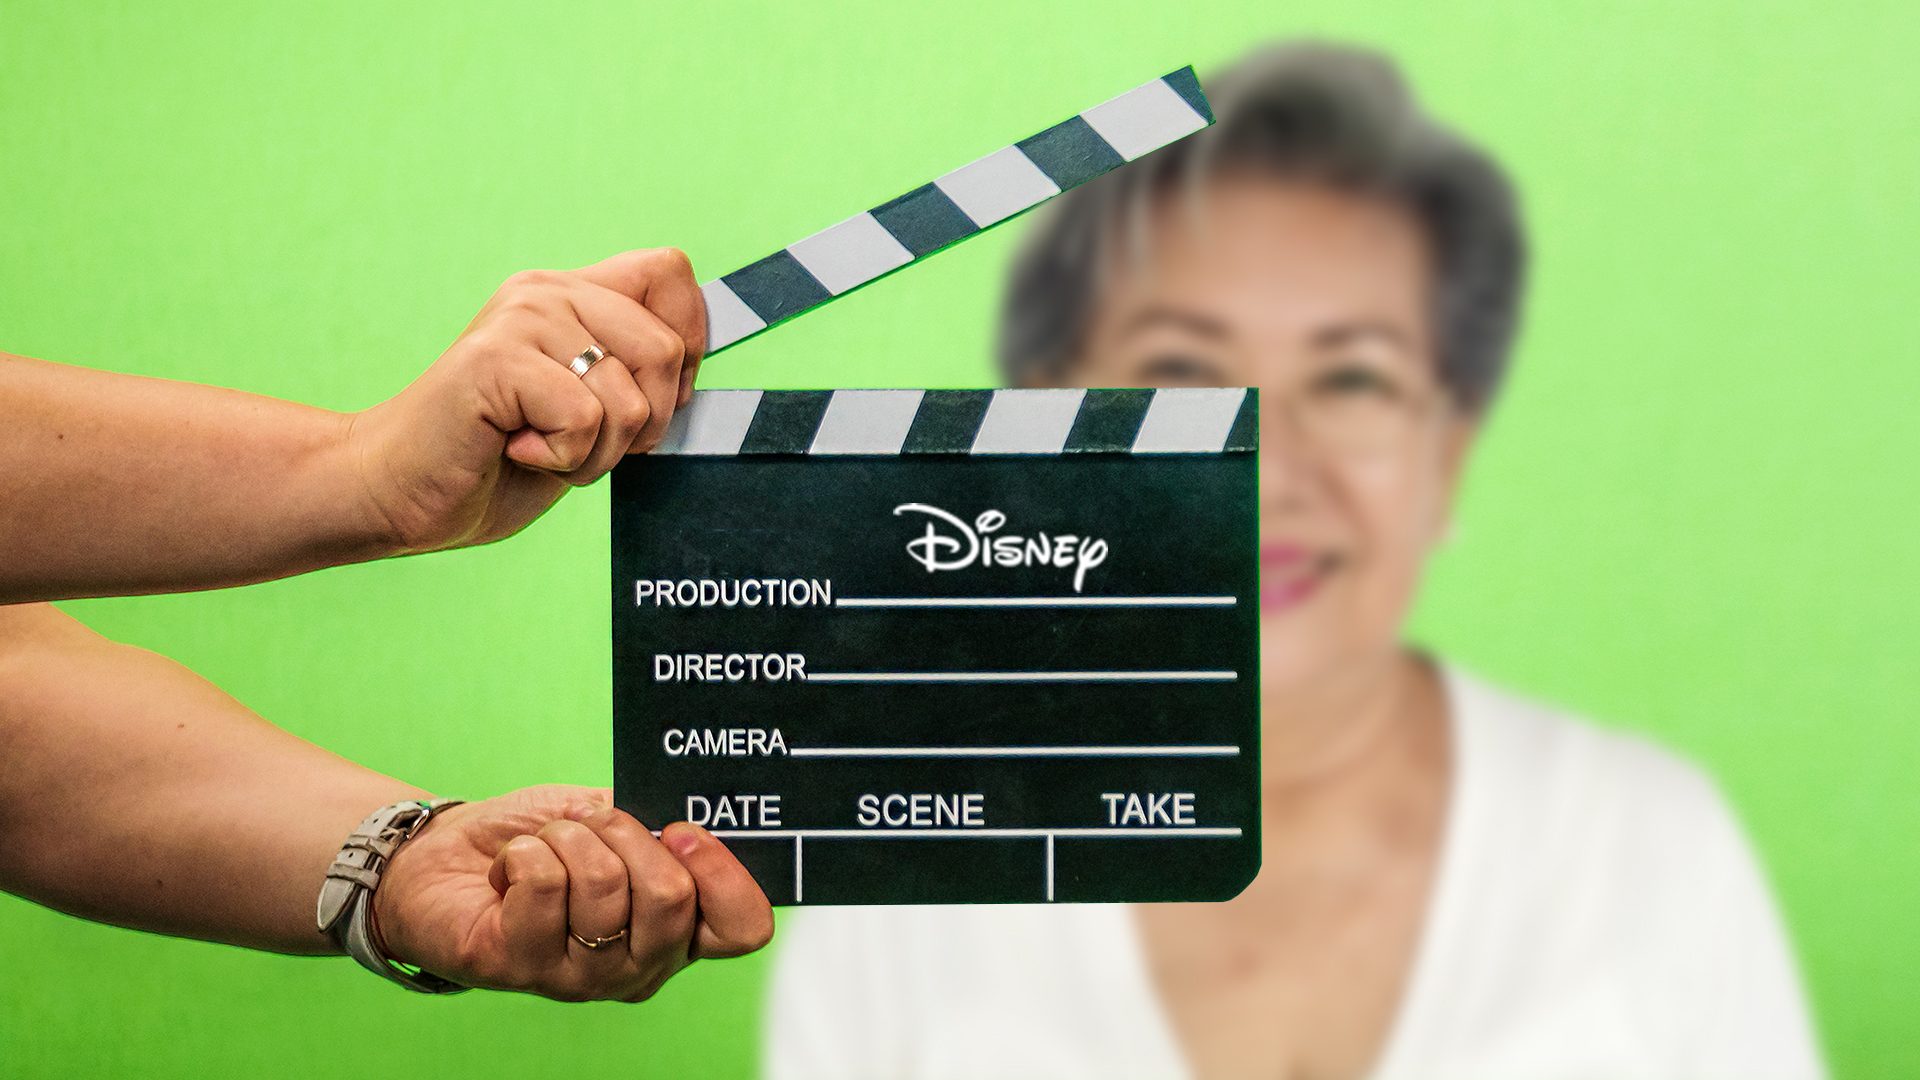 Disney is looking for Filipino lolas for an upcoming film